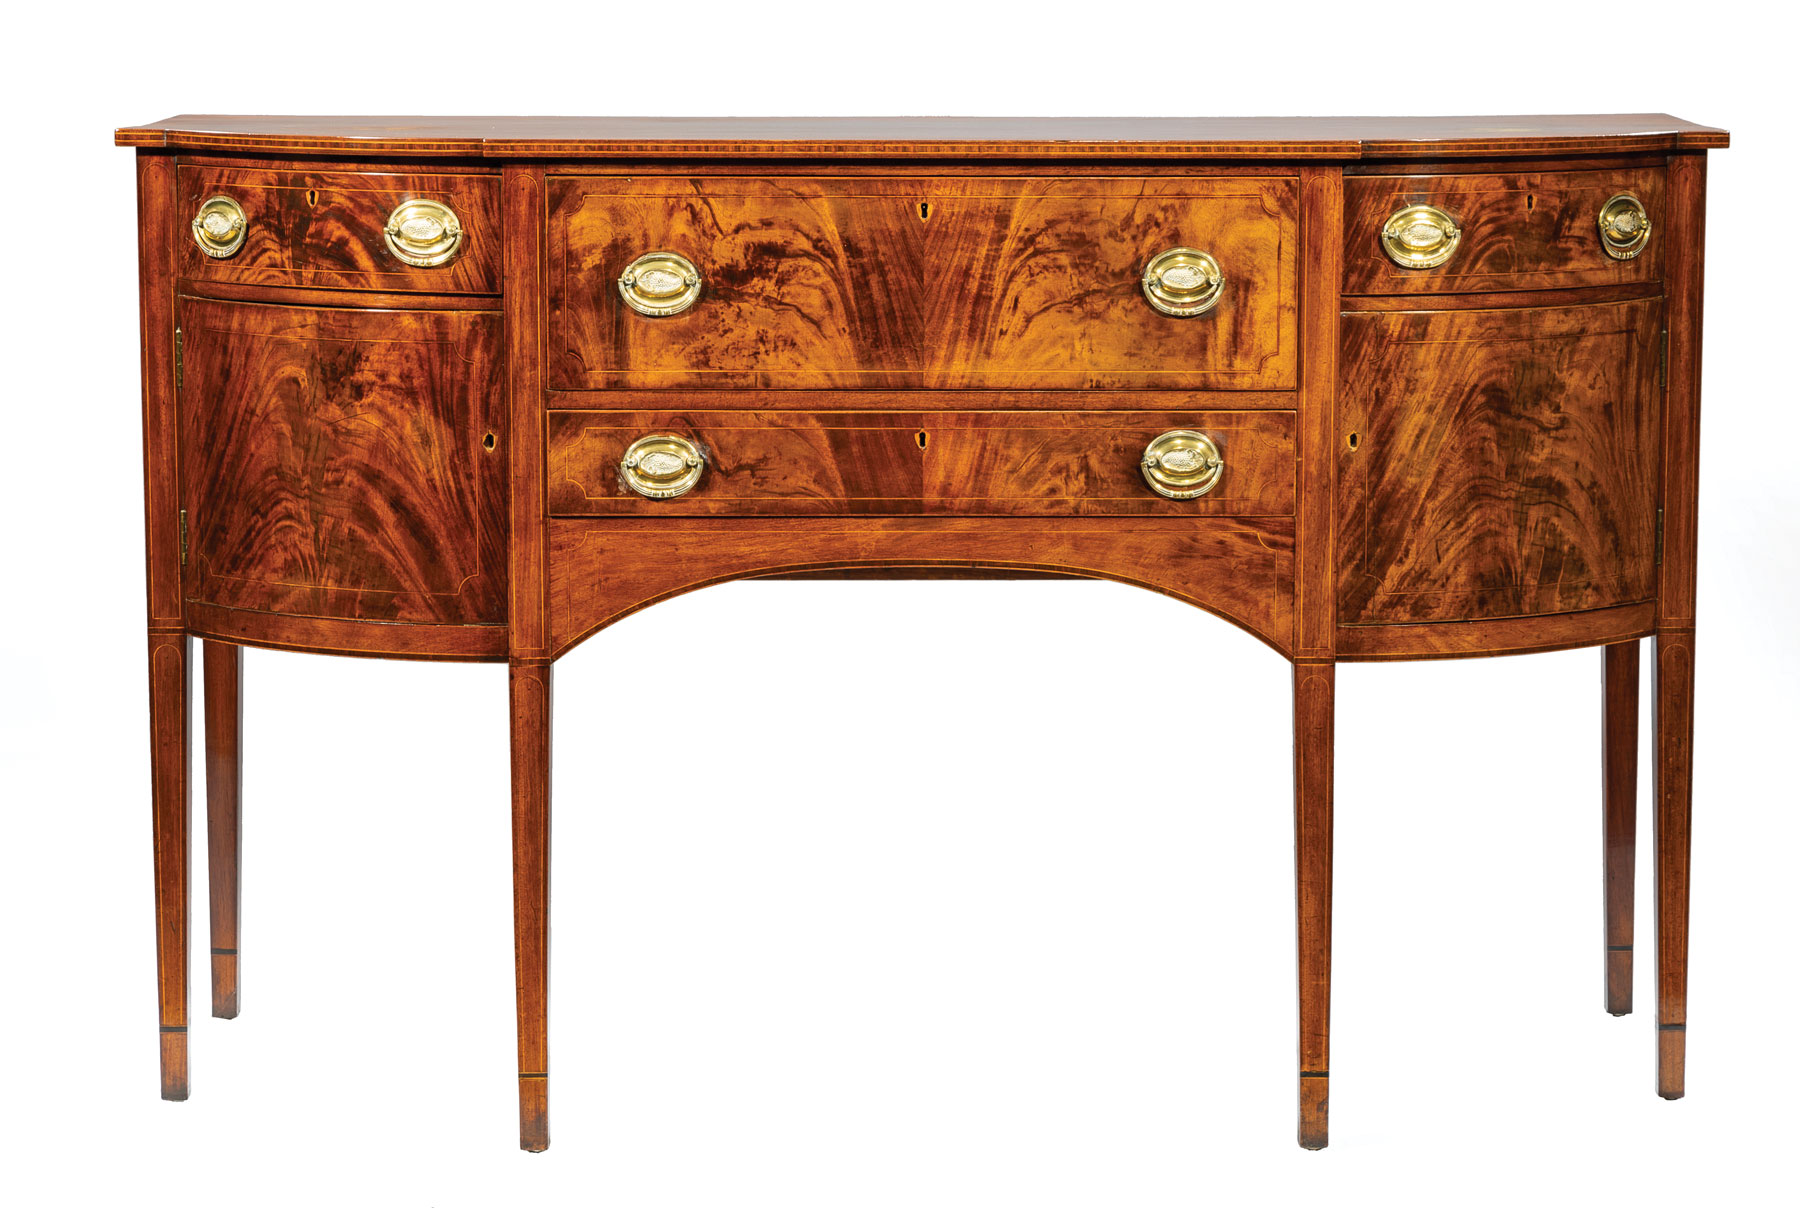 American Federal Inlaid Mahogany Sideboard, late 18th/early 19th c., shaped top, conforming case - Image 2 of 3